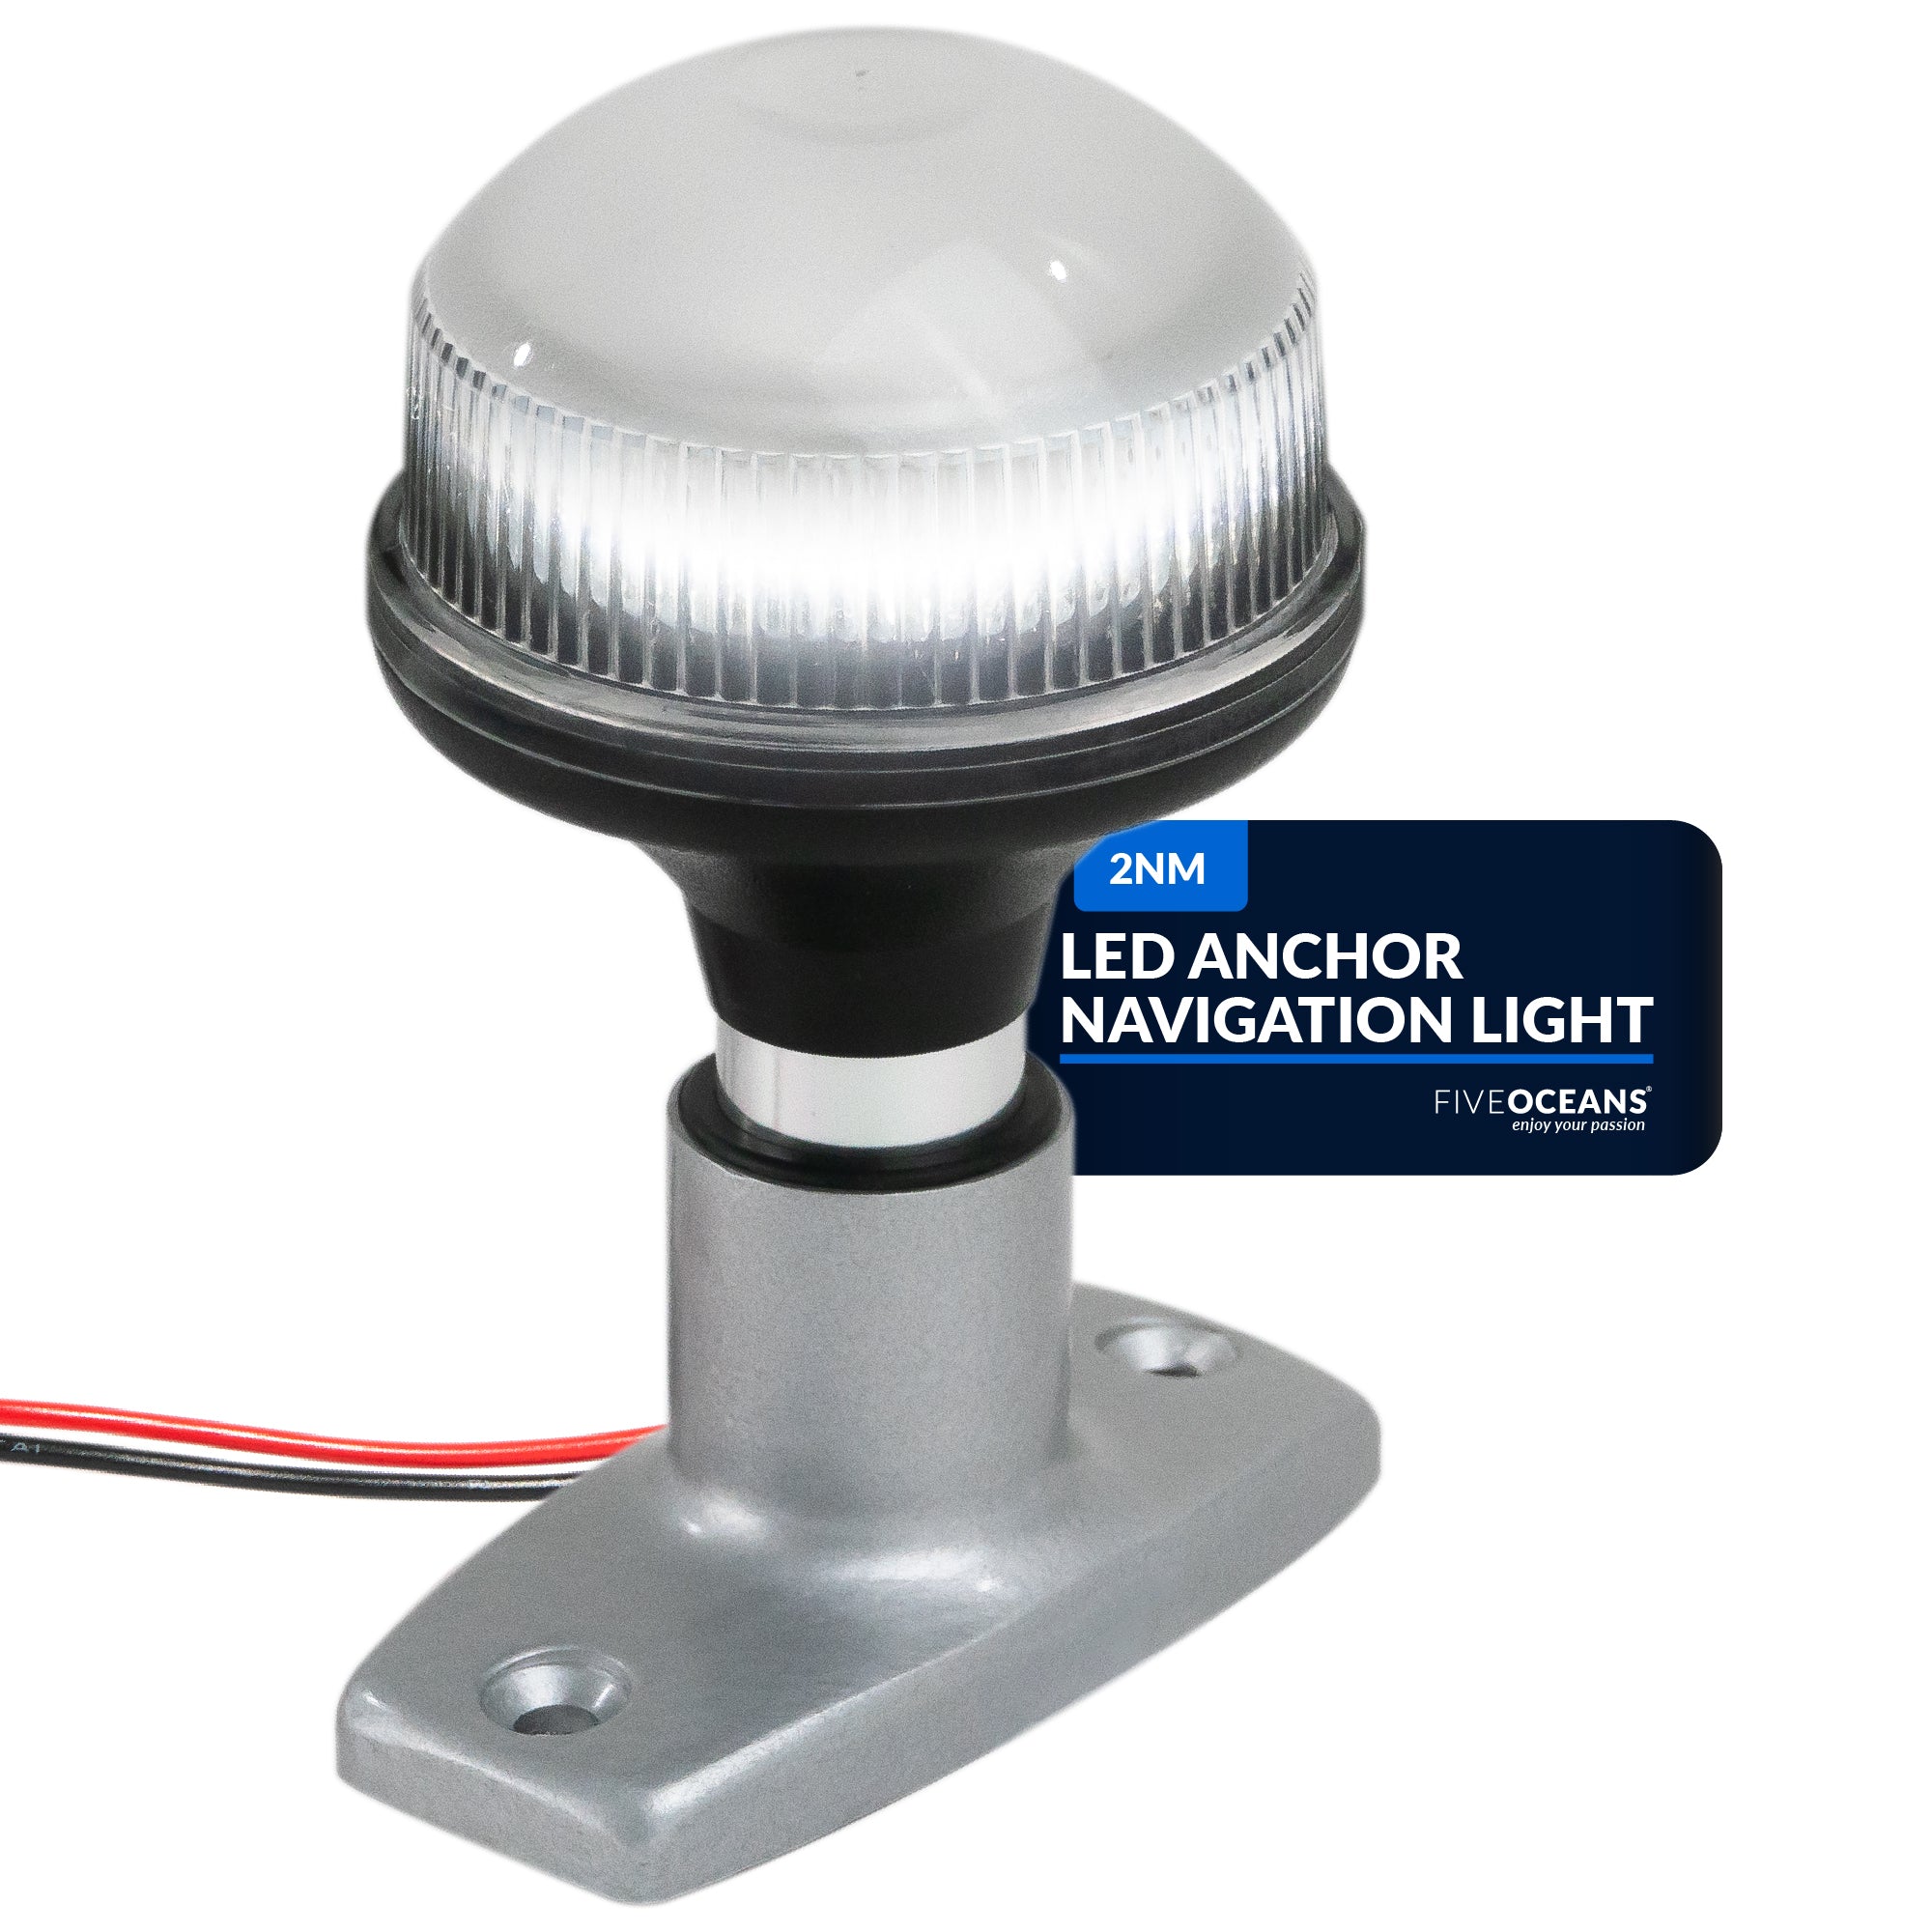 LED Anchor Navigation Light 4", Fixed Mount, 2NM - FO2874